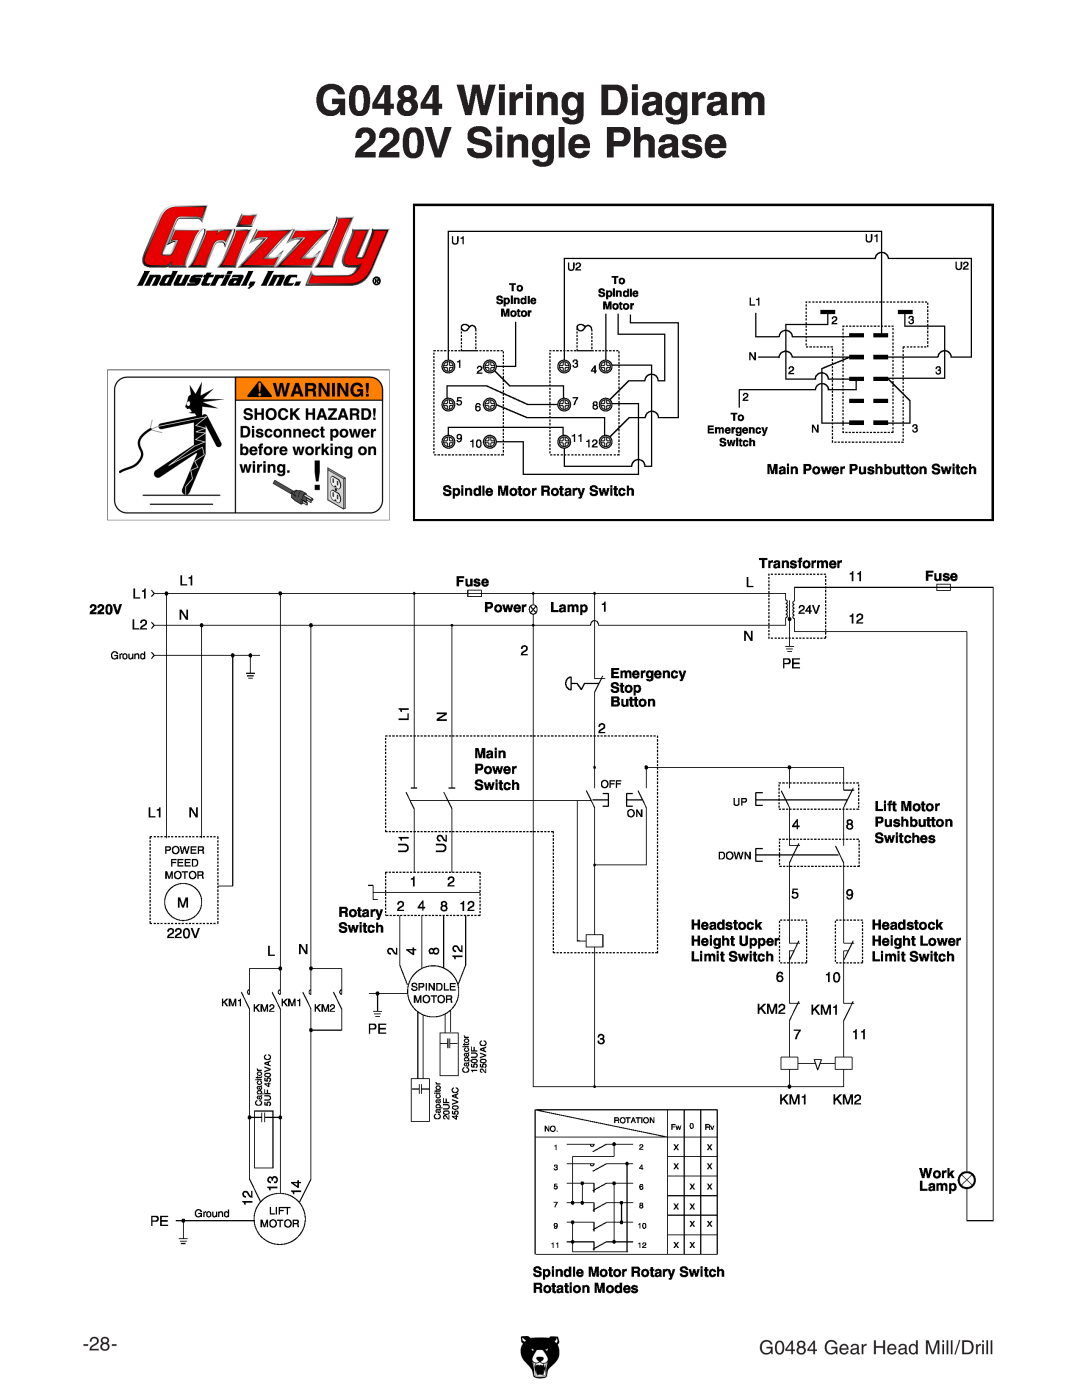 Grizzly owner manual G0484 Wiring Diagram 220V Single Phase, G0484 Gear Head Mill/Drill 